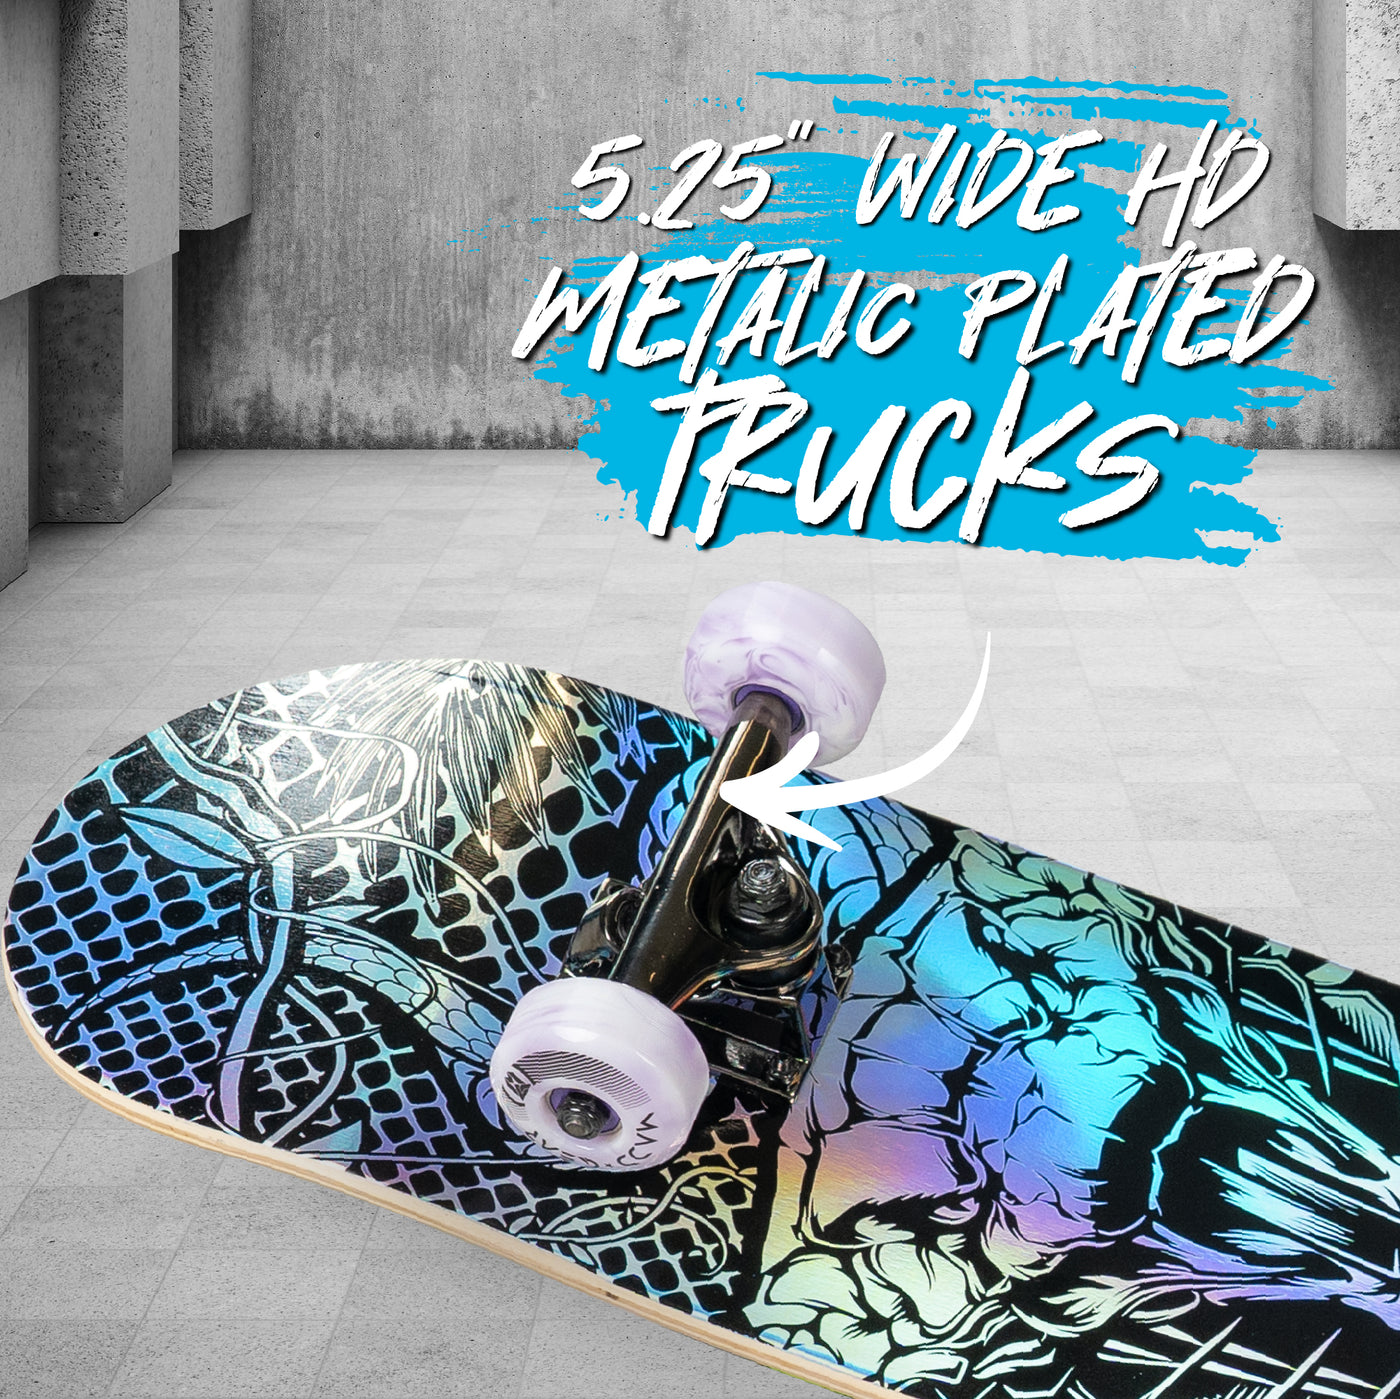 Madd Gear Complete Grind Popsicle Kicktail Skateboard Holographic Snake Metallic Plated Trucks